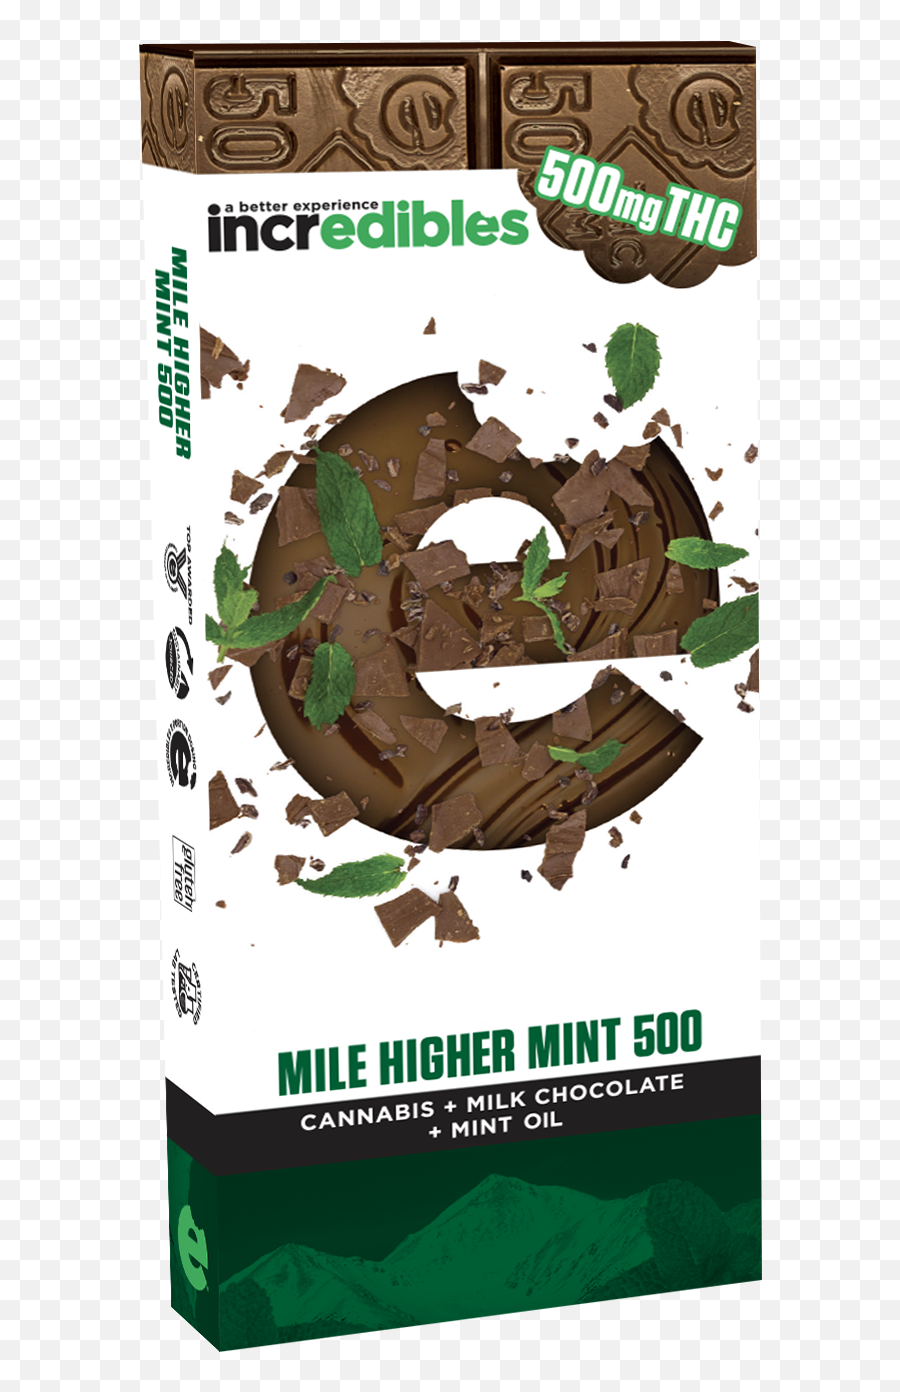 Mile Higher Mint - Incredible Edibles Mile High Emoji,What Emotion Does Mint Represent